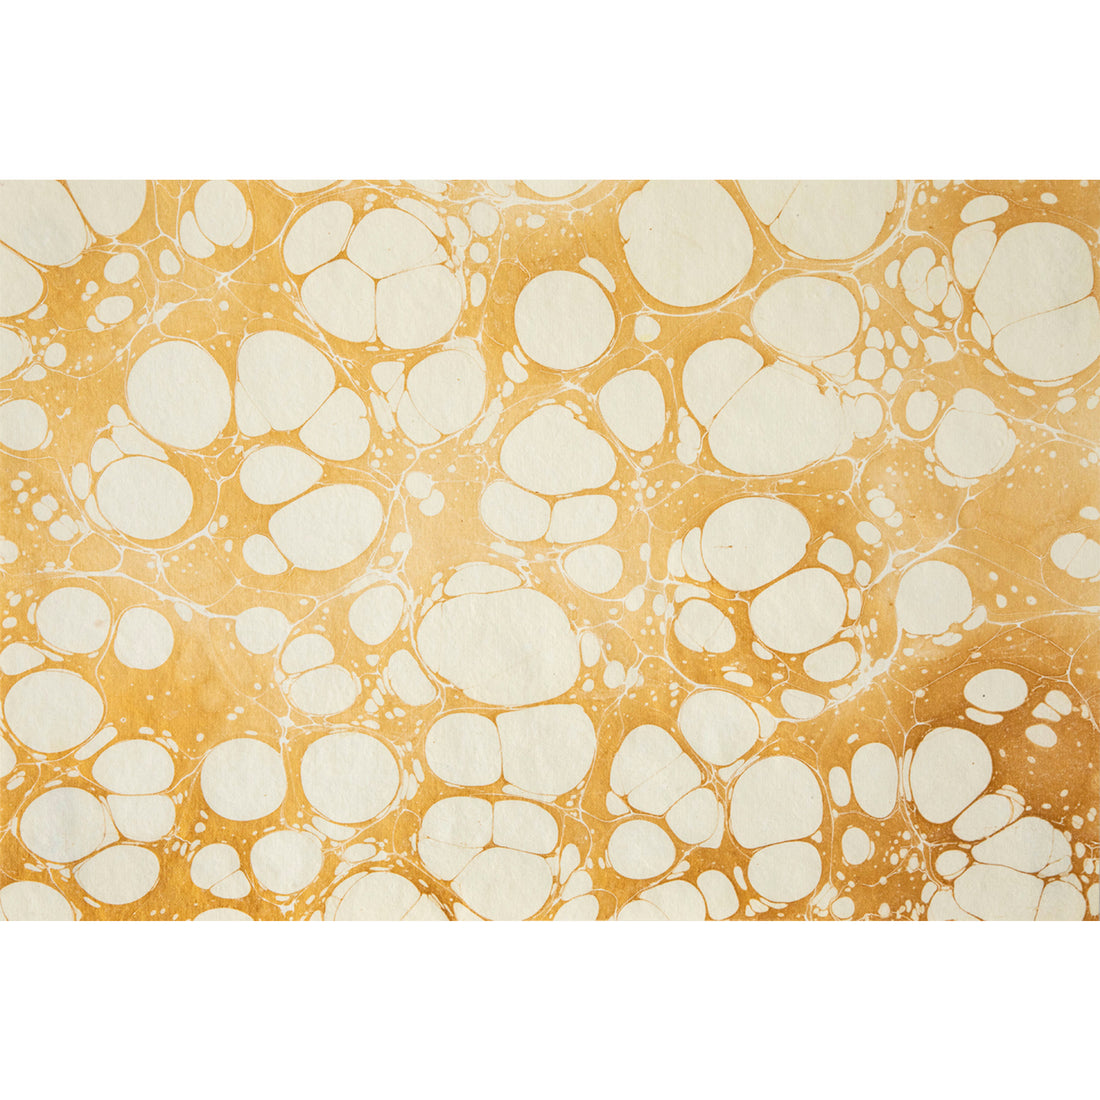 An abstract, marbled pattern of white bubbles scattered in gold ink.